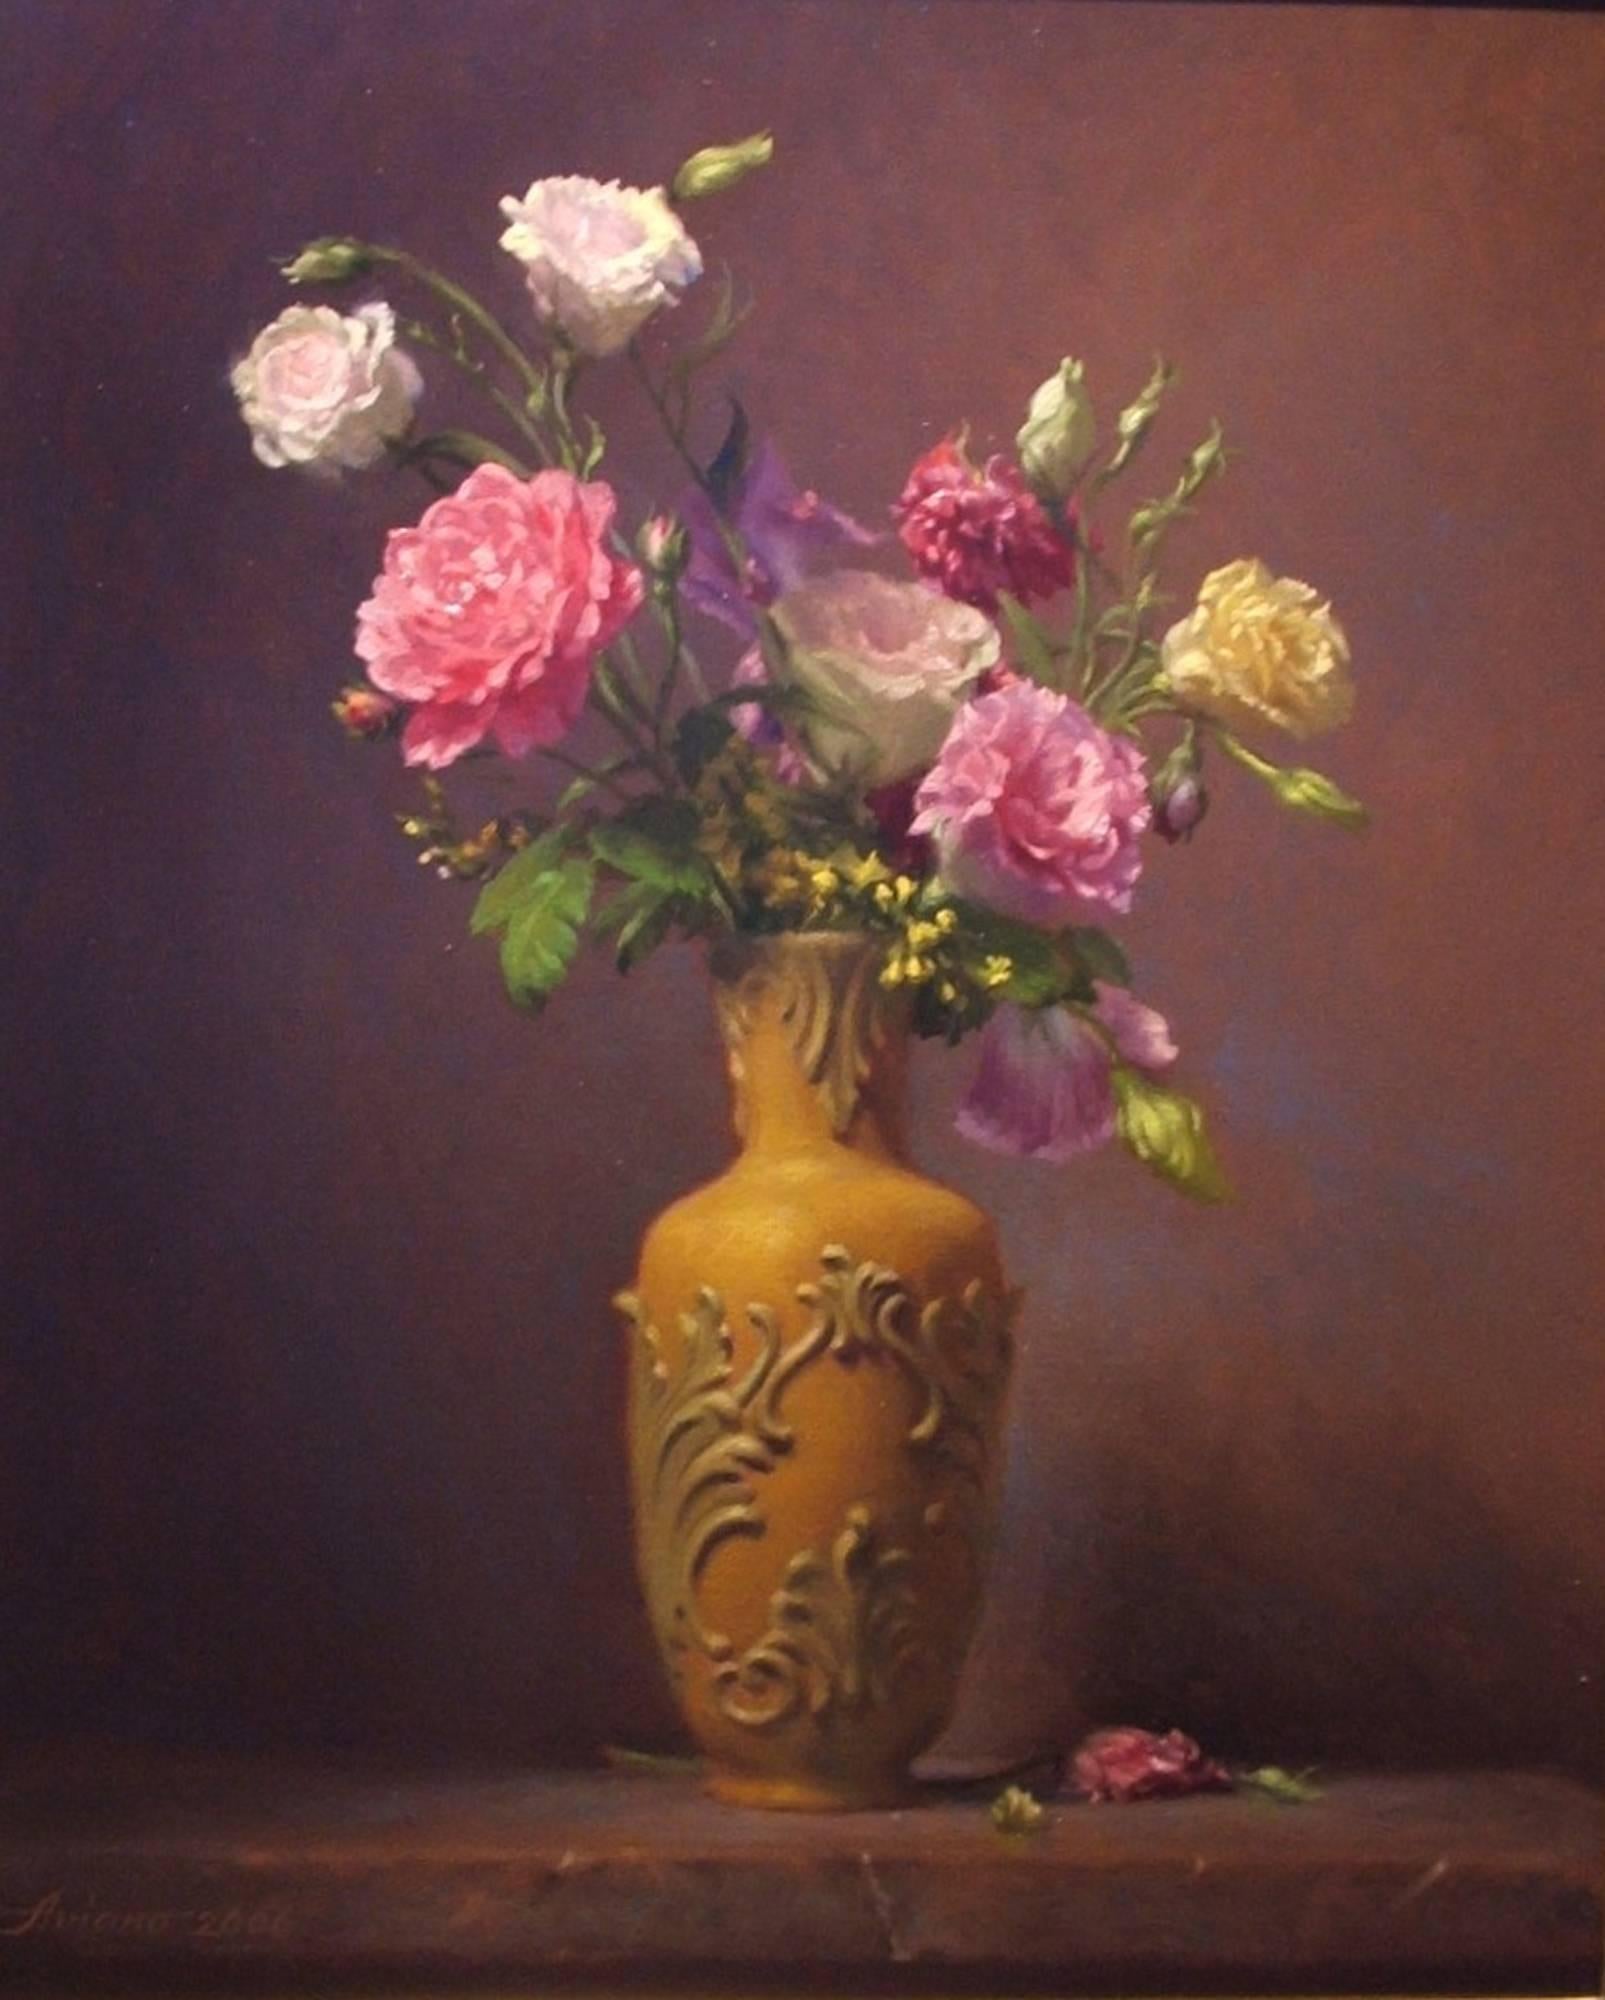 Roses & Lisianthus - Painting by Michael Aviano